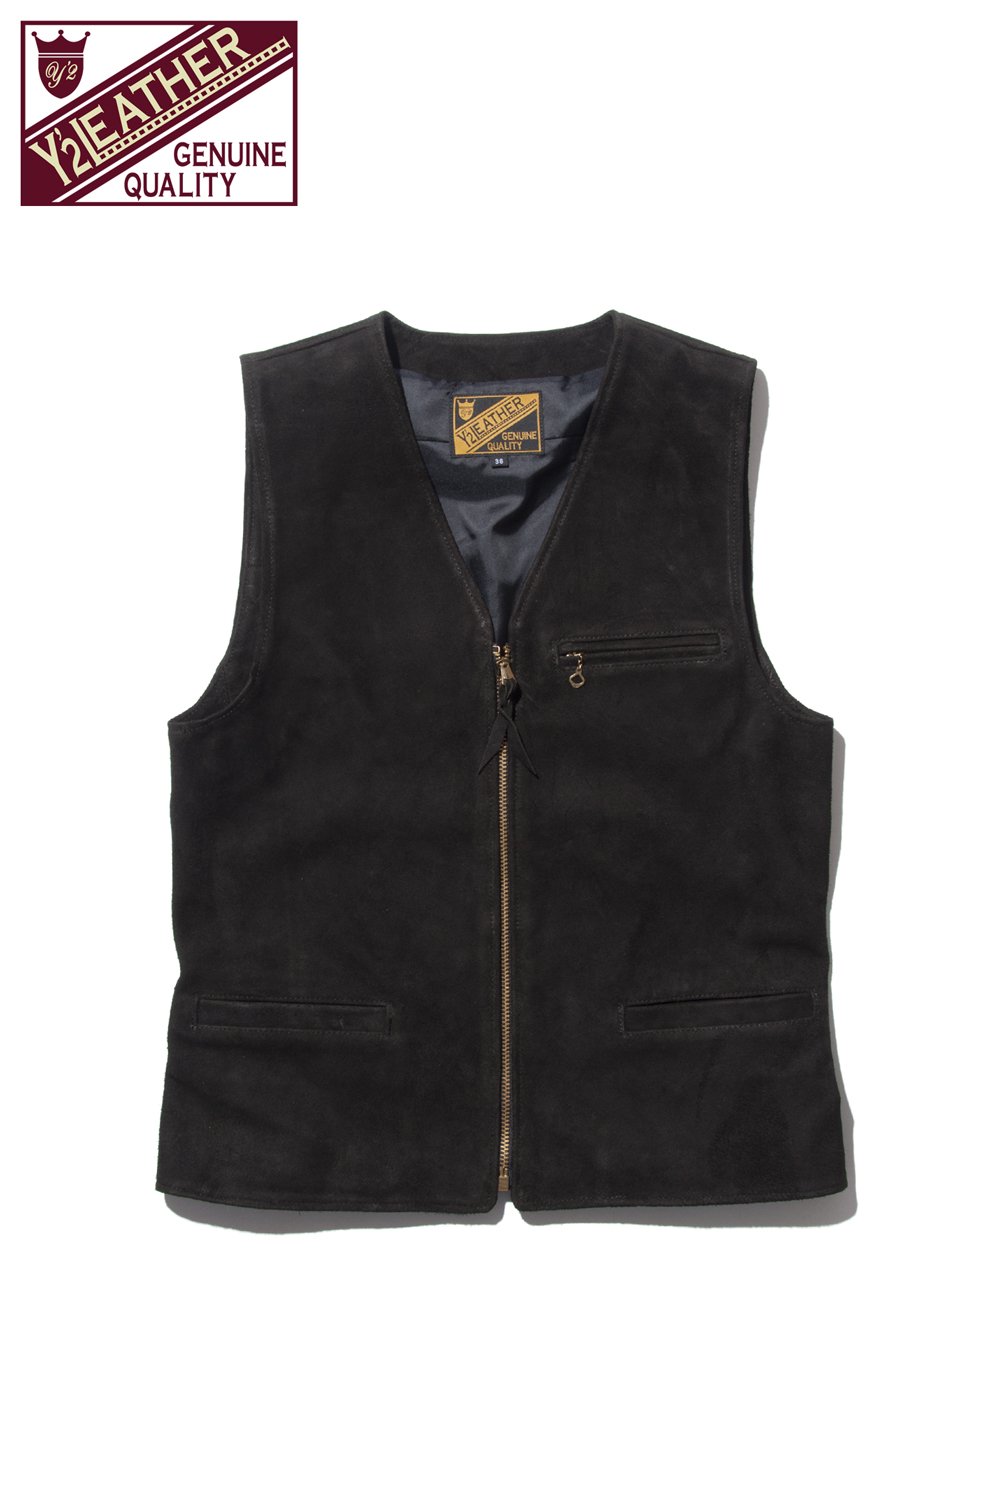 Y'2 LEATHER(ワイツーレザー) カウスエードベスト COW SUEDE ZIP VEST